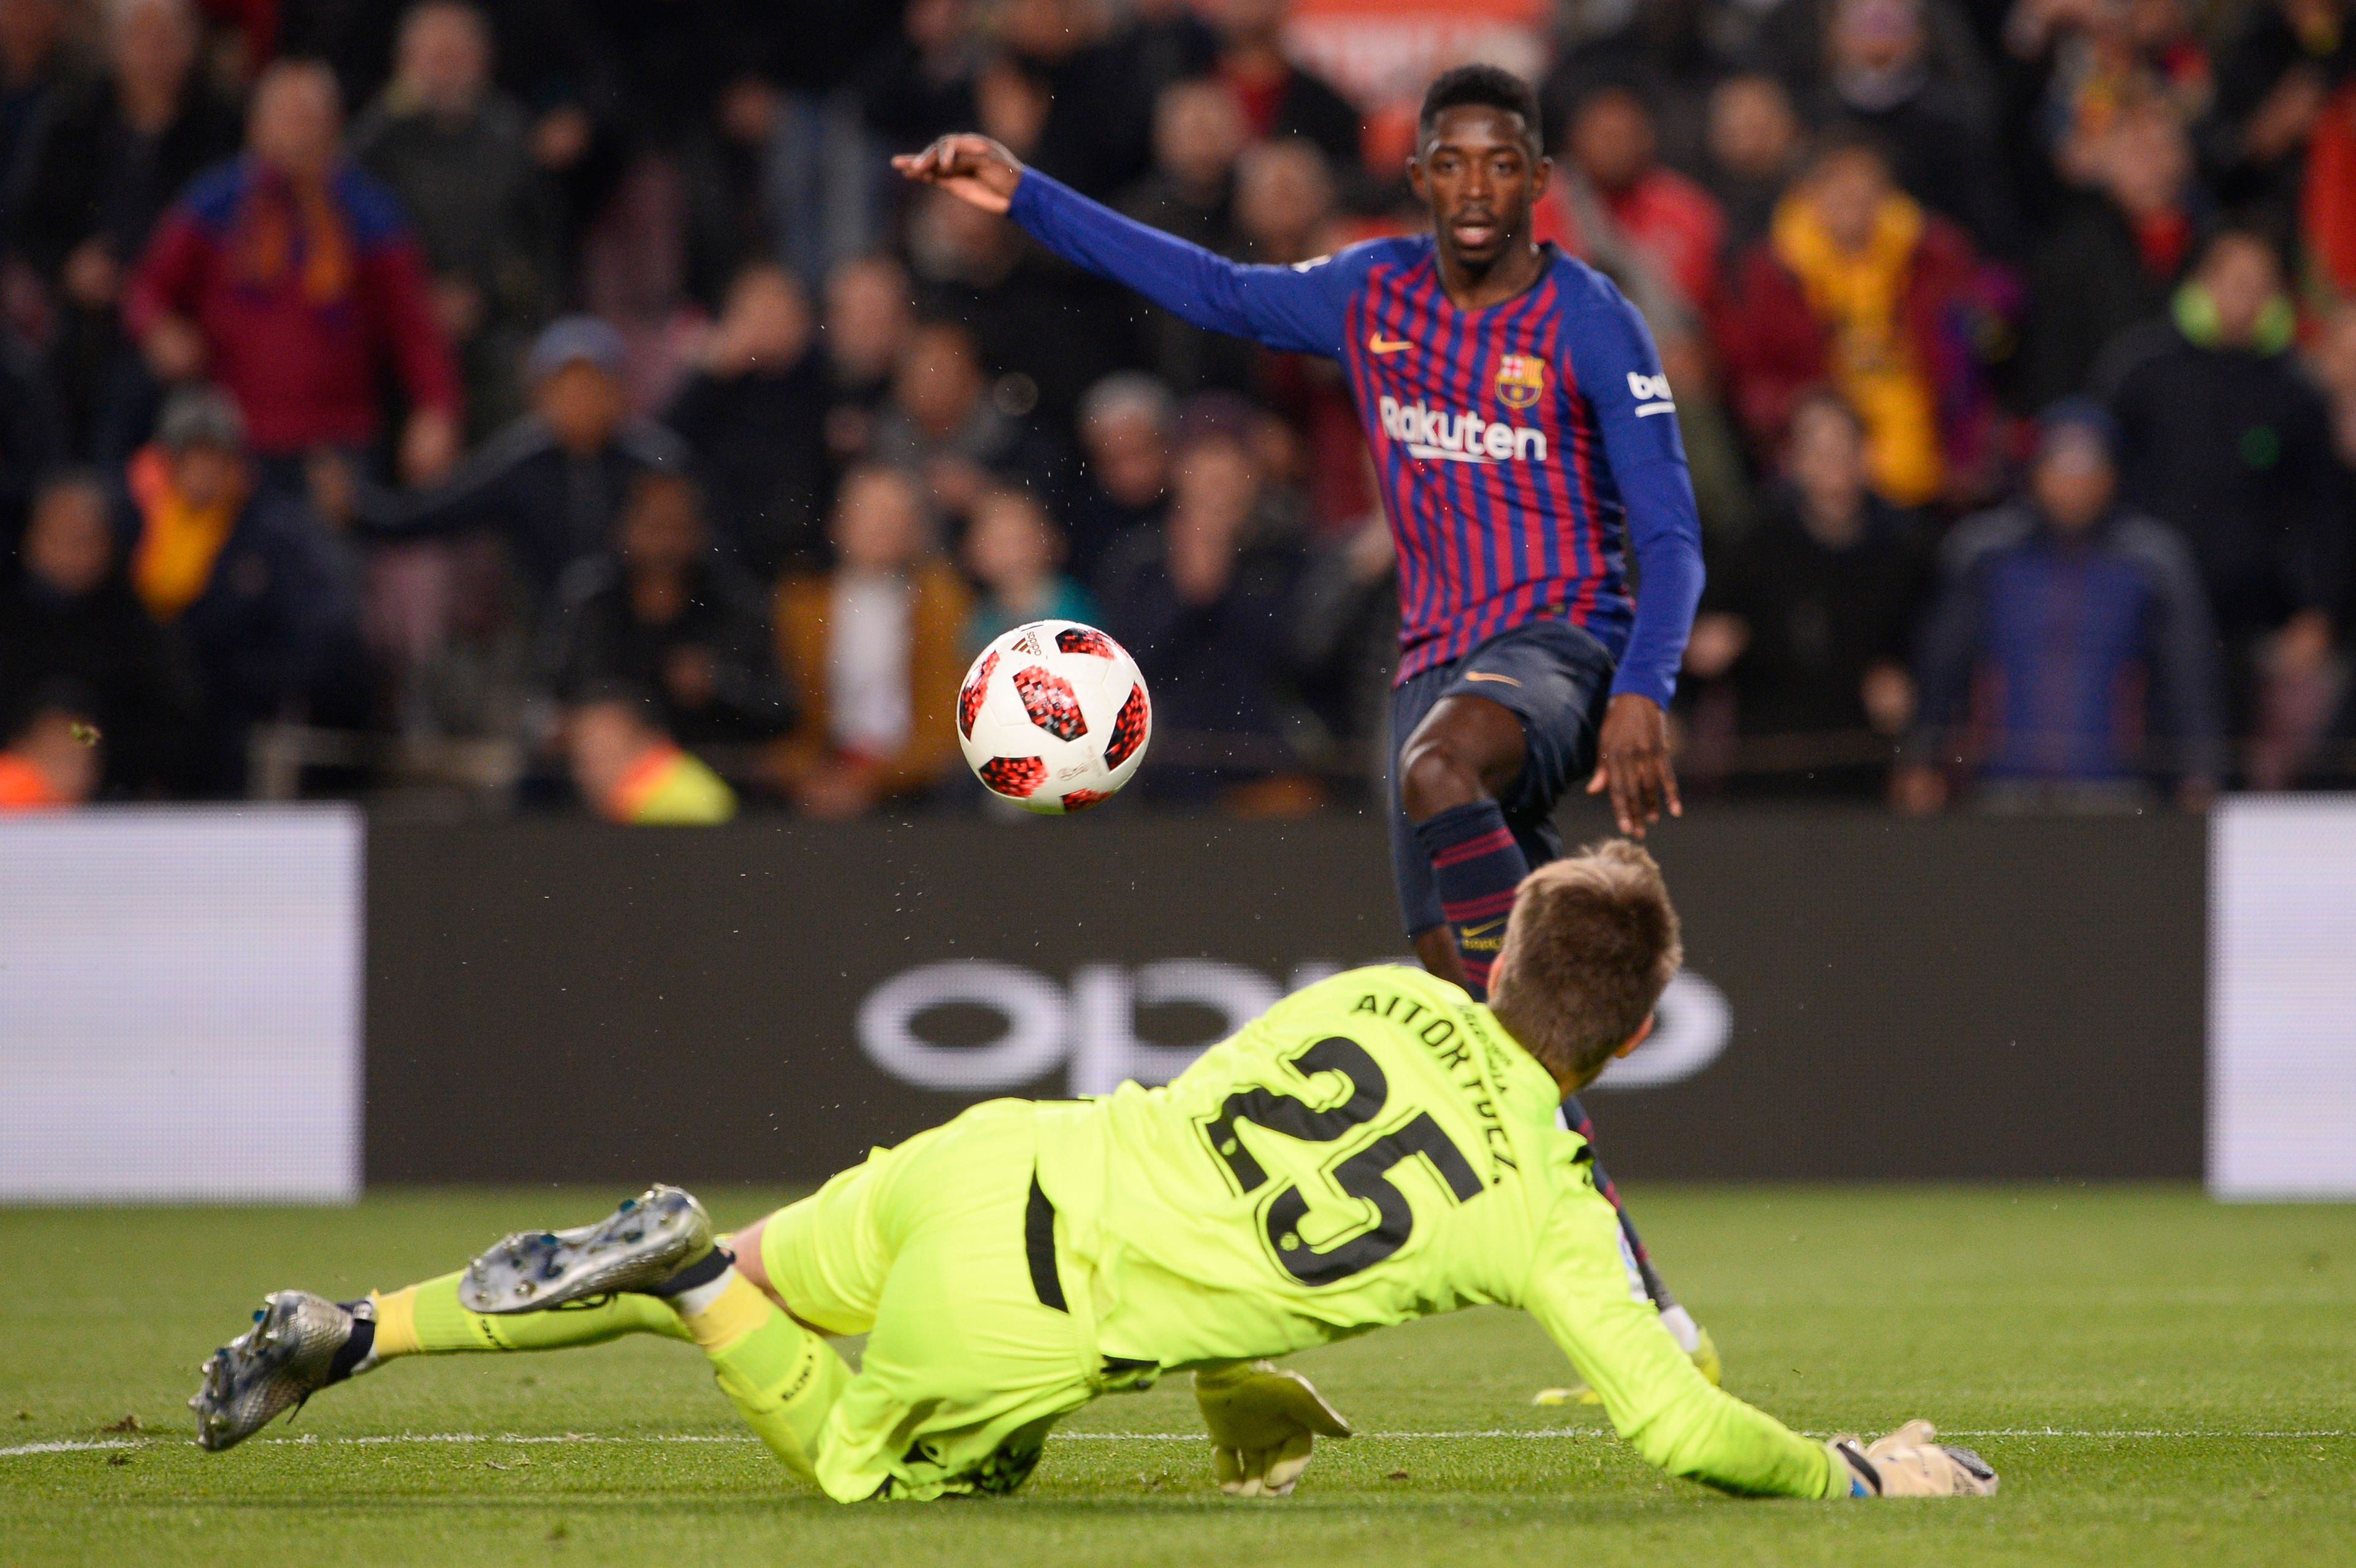 Dembele double helps Barca defeat Levante but threat of disqualification looms